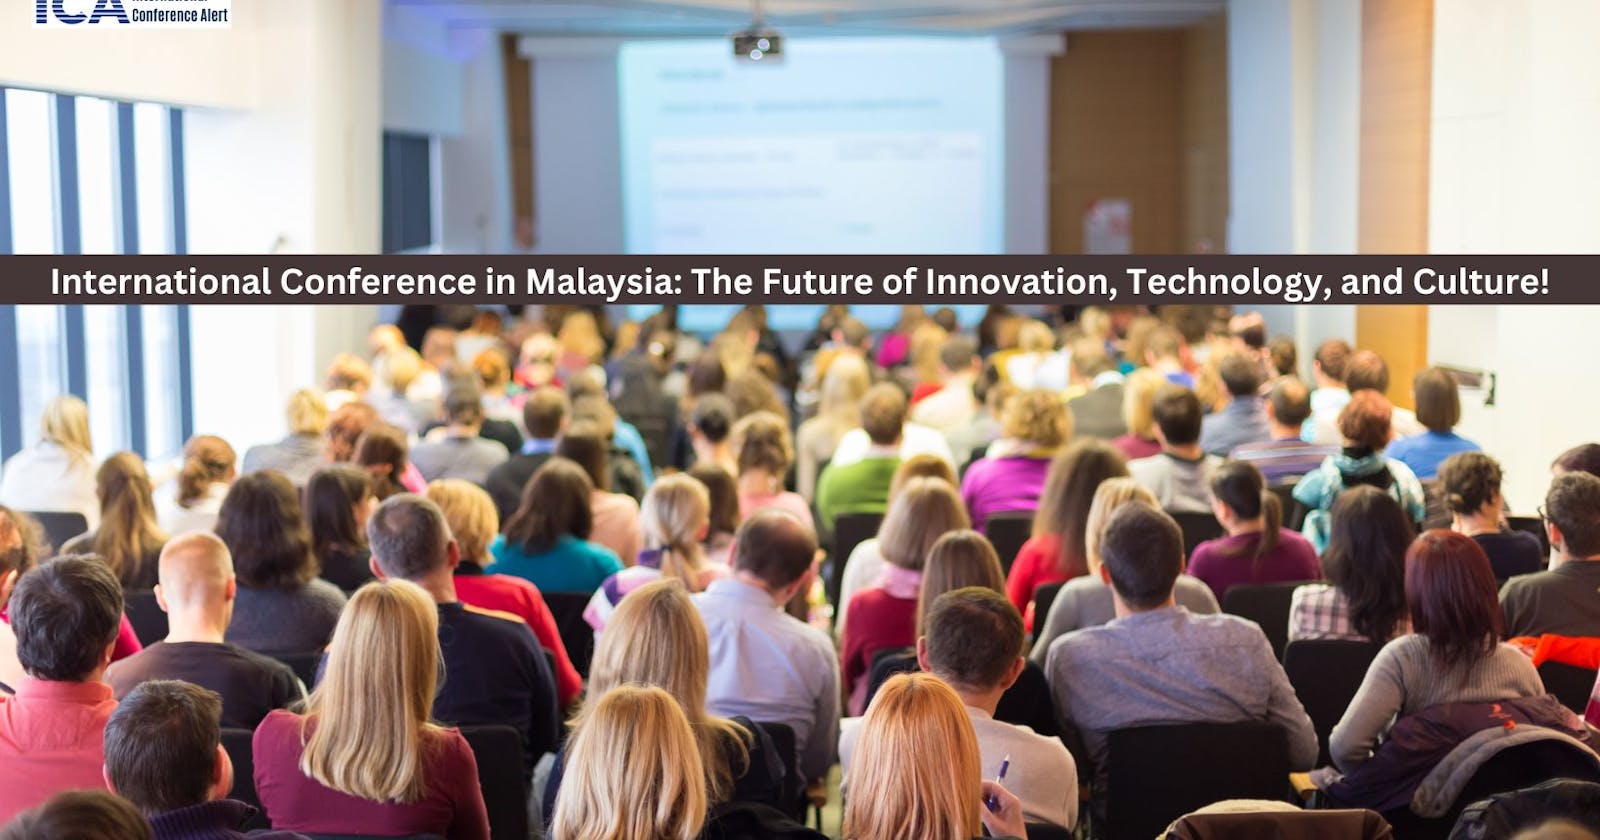 International Conference in Malaysia: The Future of Innovation, Technology, and Culture!